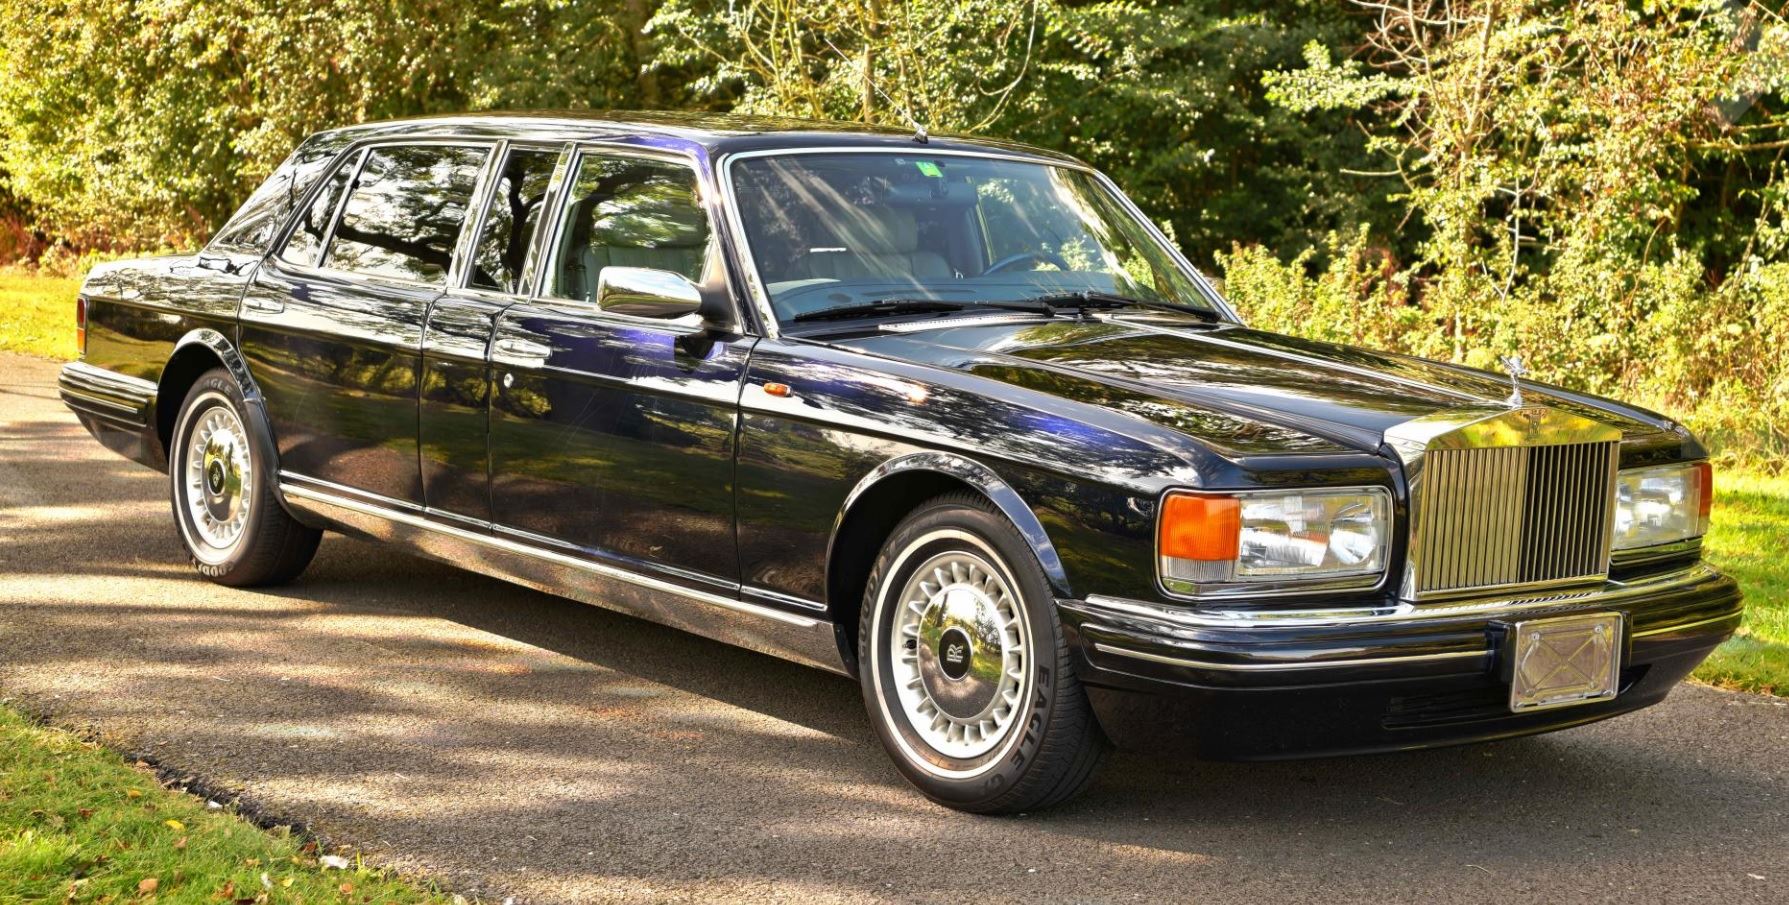 Rolls royce silver spur touring limousine lhd with division cc9bnuip 5533ofao jwv